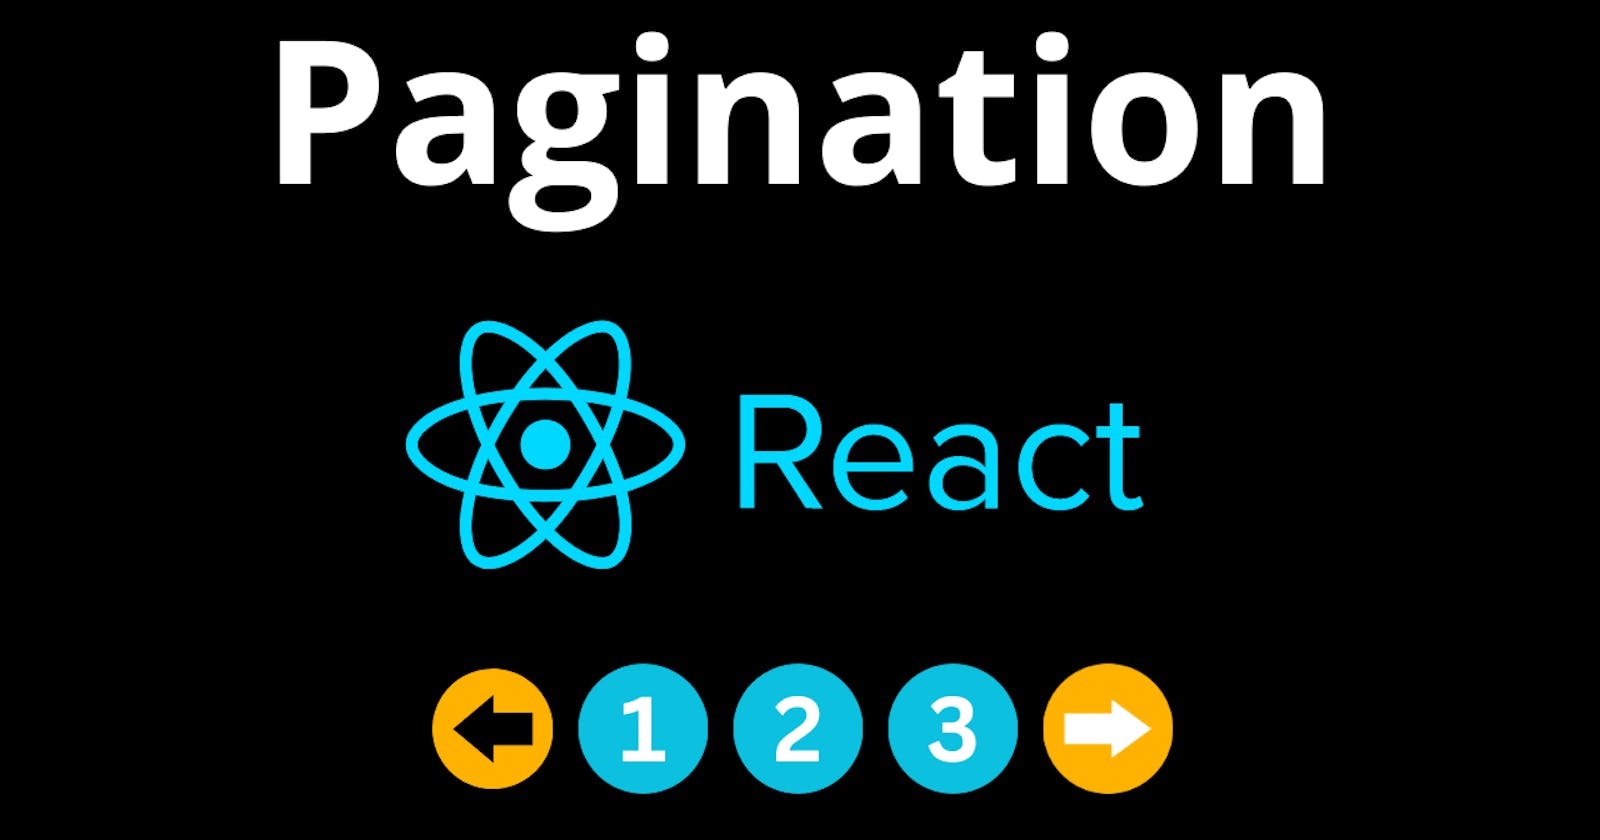 Pagination in React with implementation